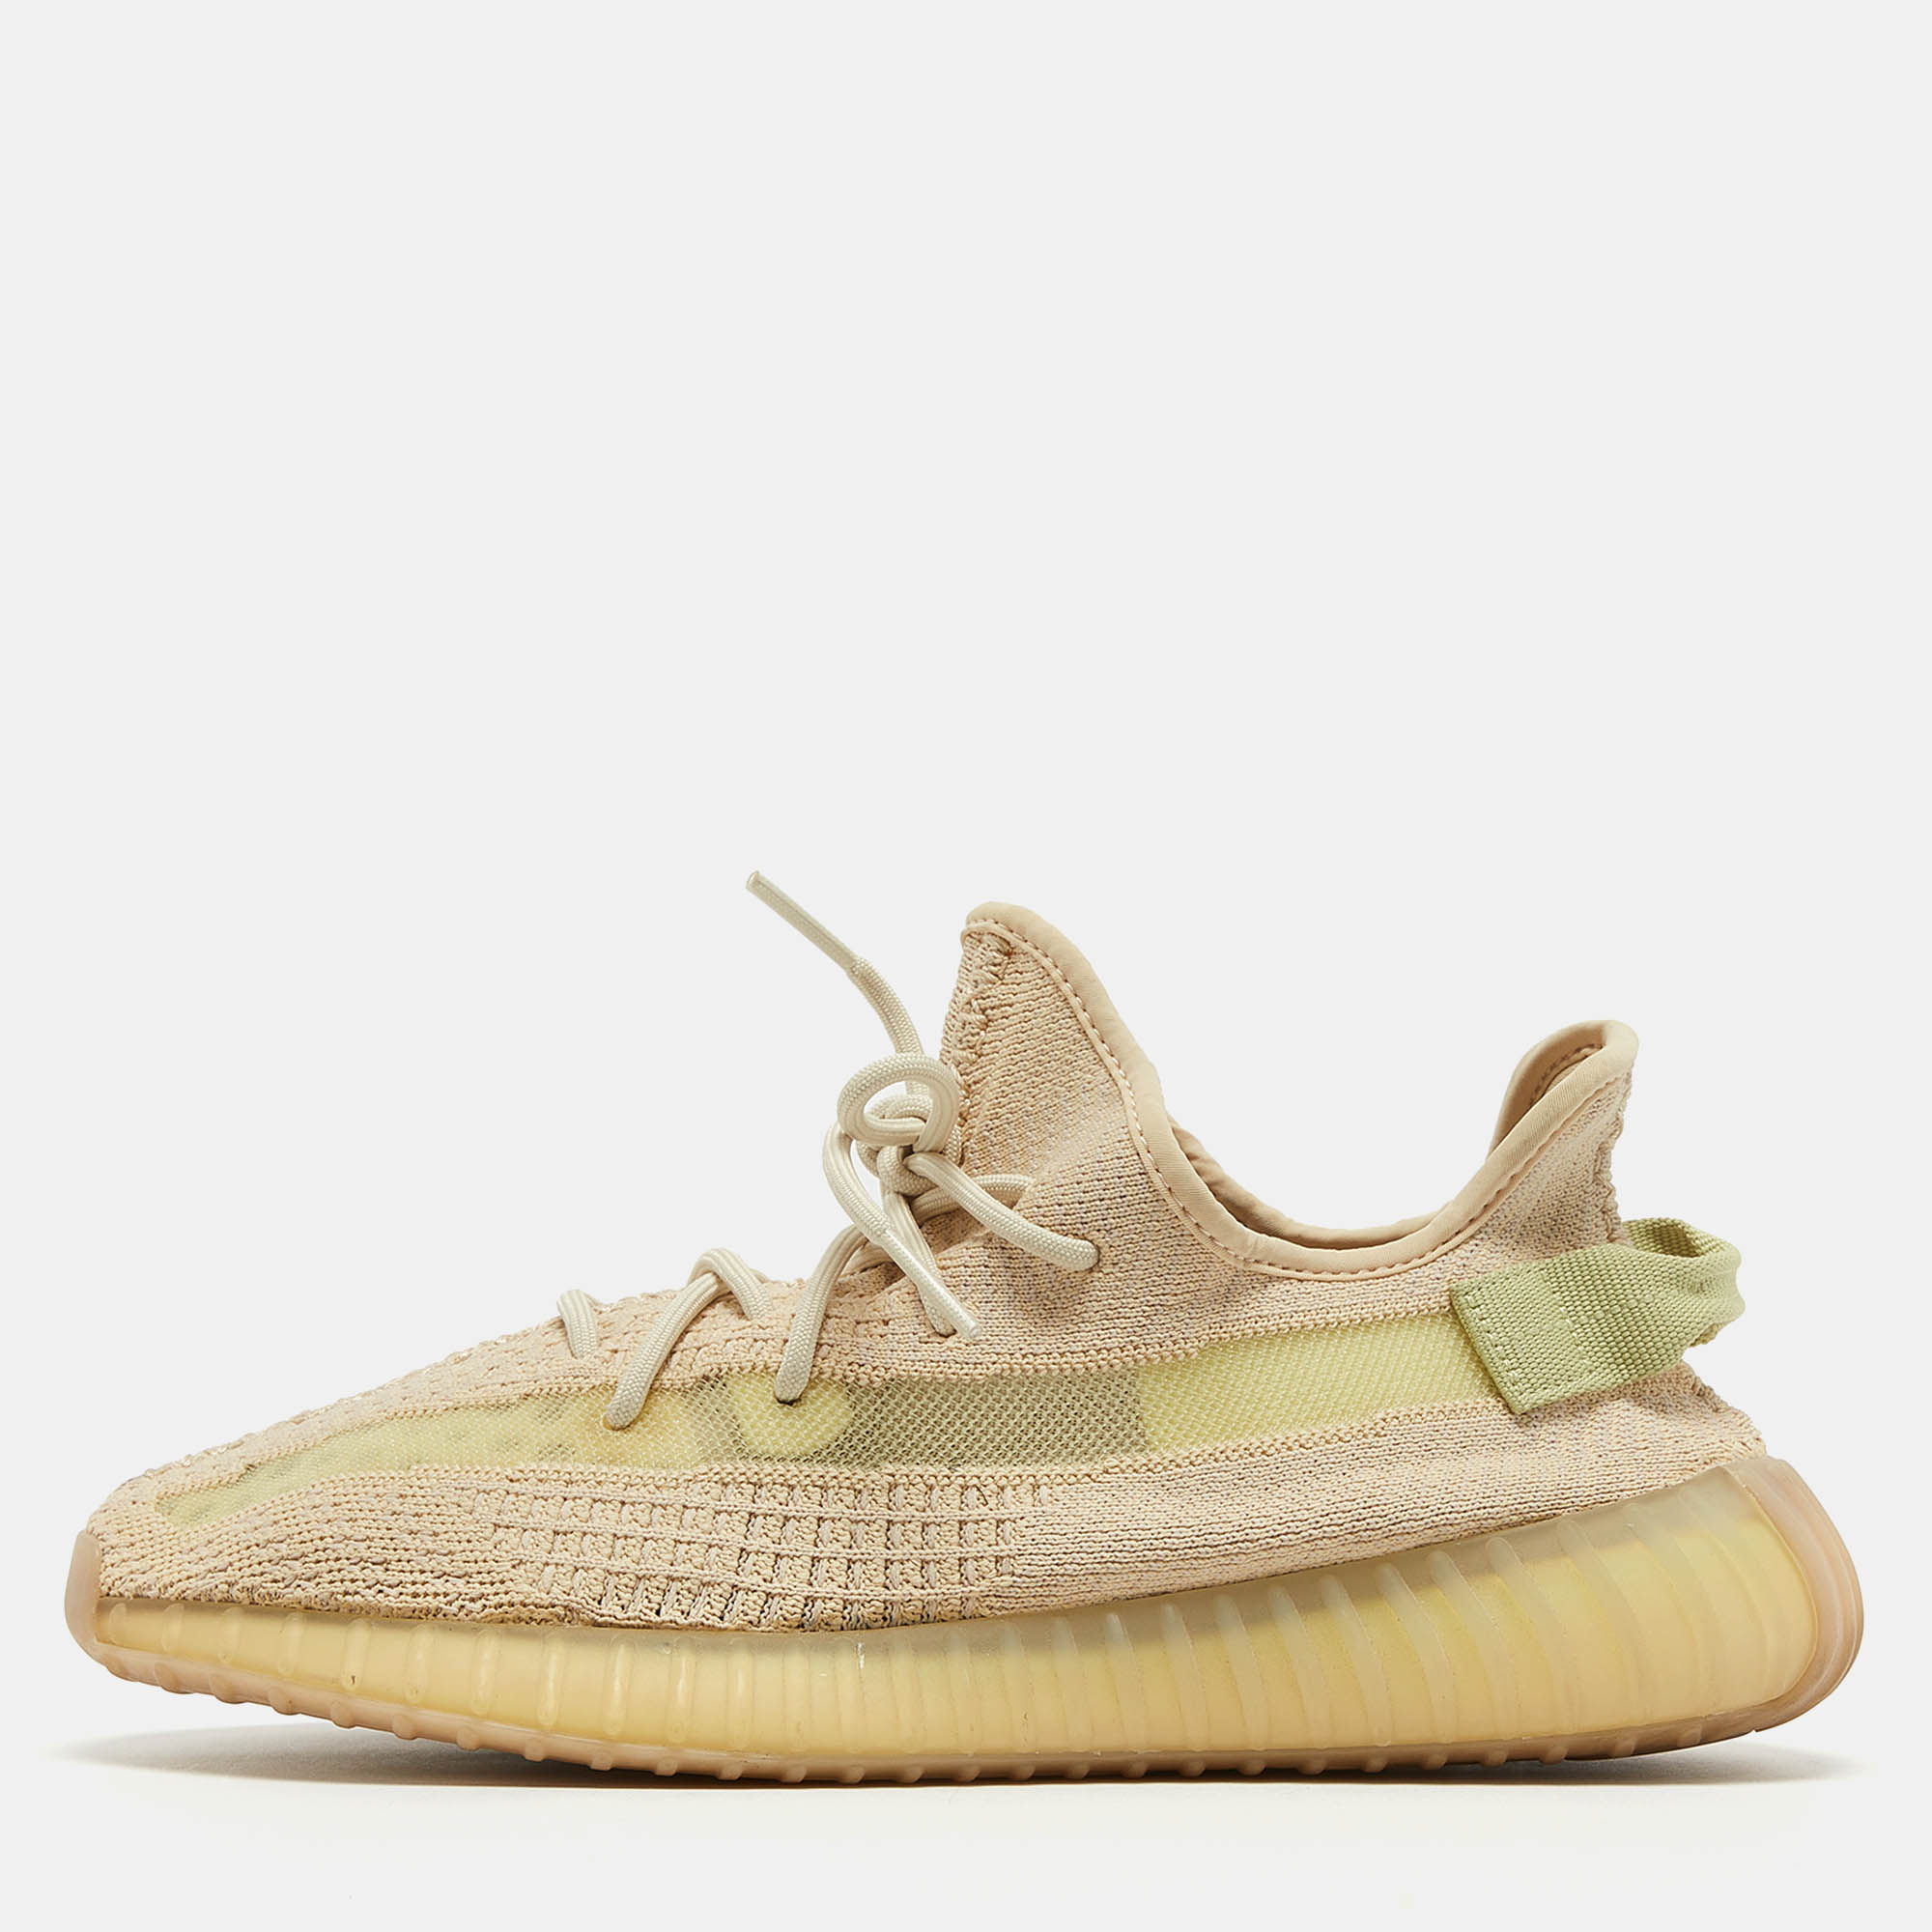 

Yeezy x Adidas Light Yellow Knit Fabric Boost 350 V2 Butter Sneakers Size